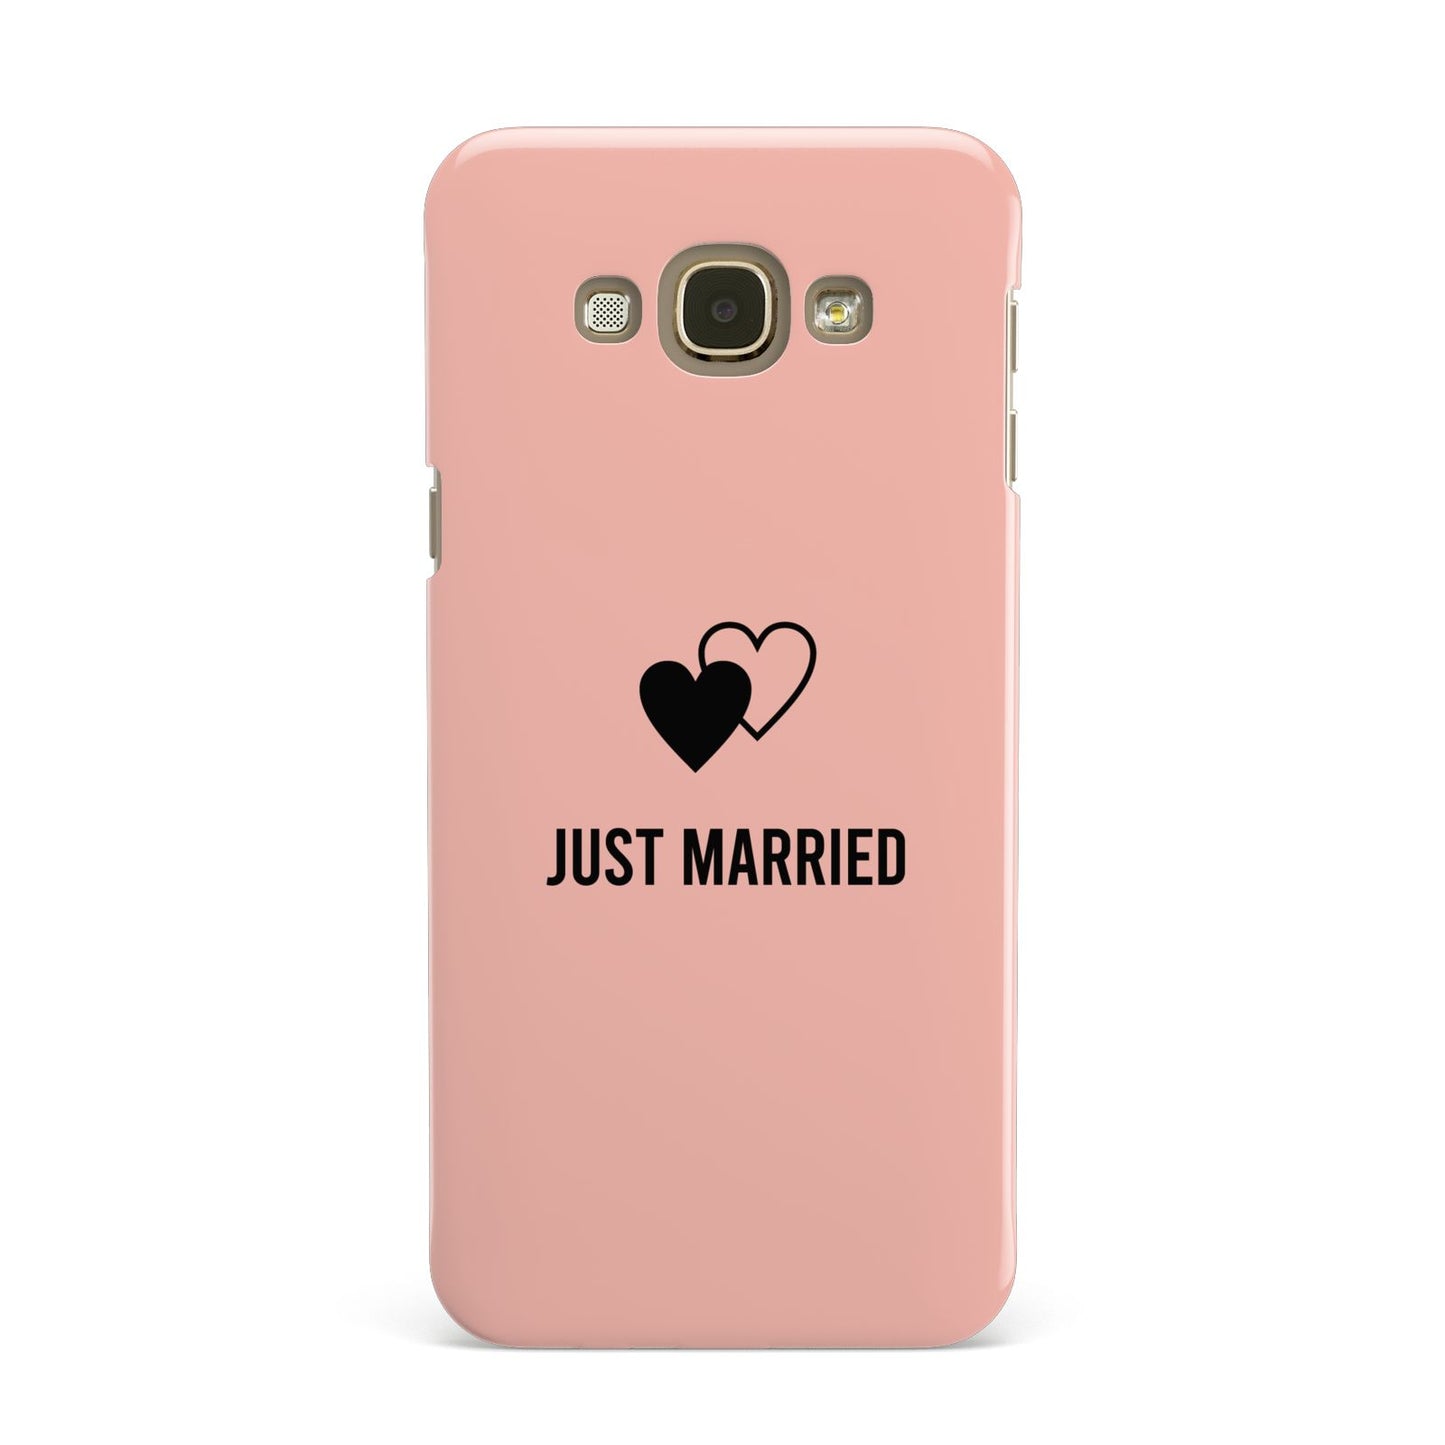 Just Married Samsung Galaxy A8 Case